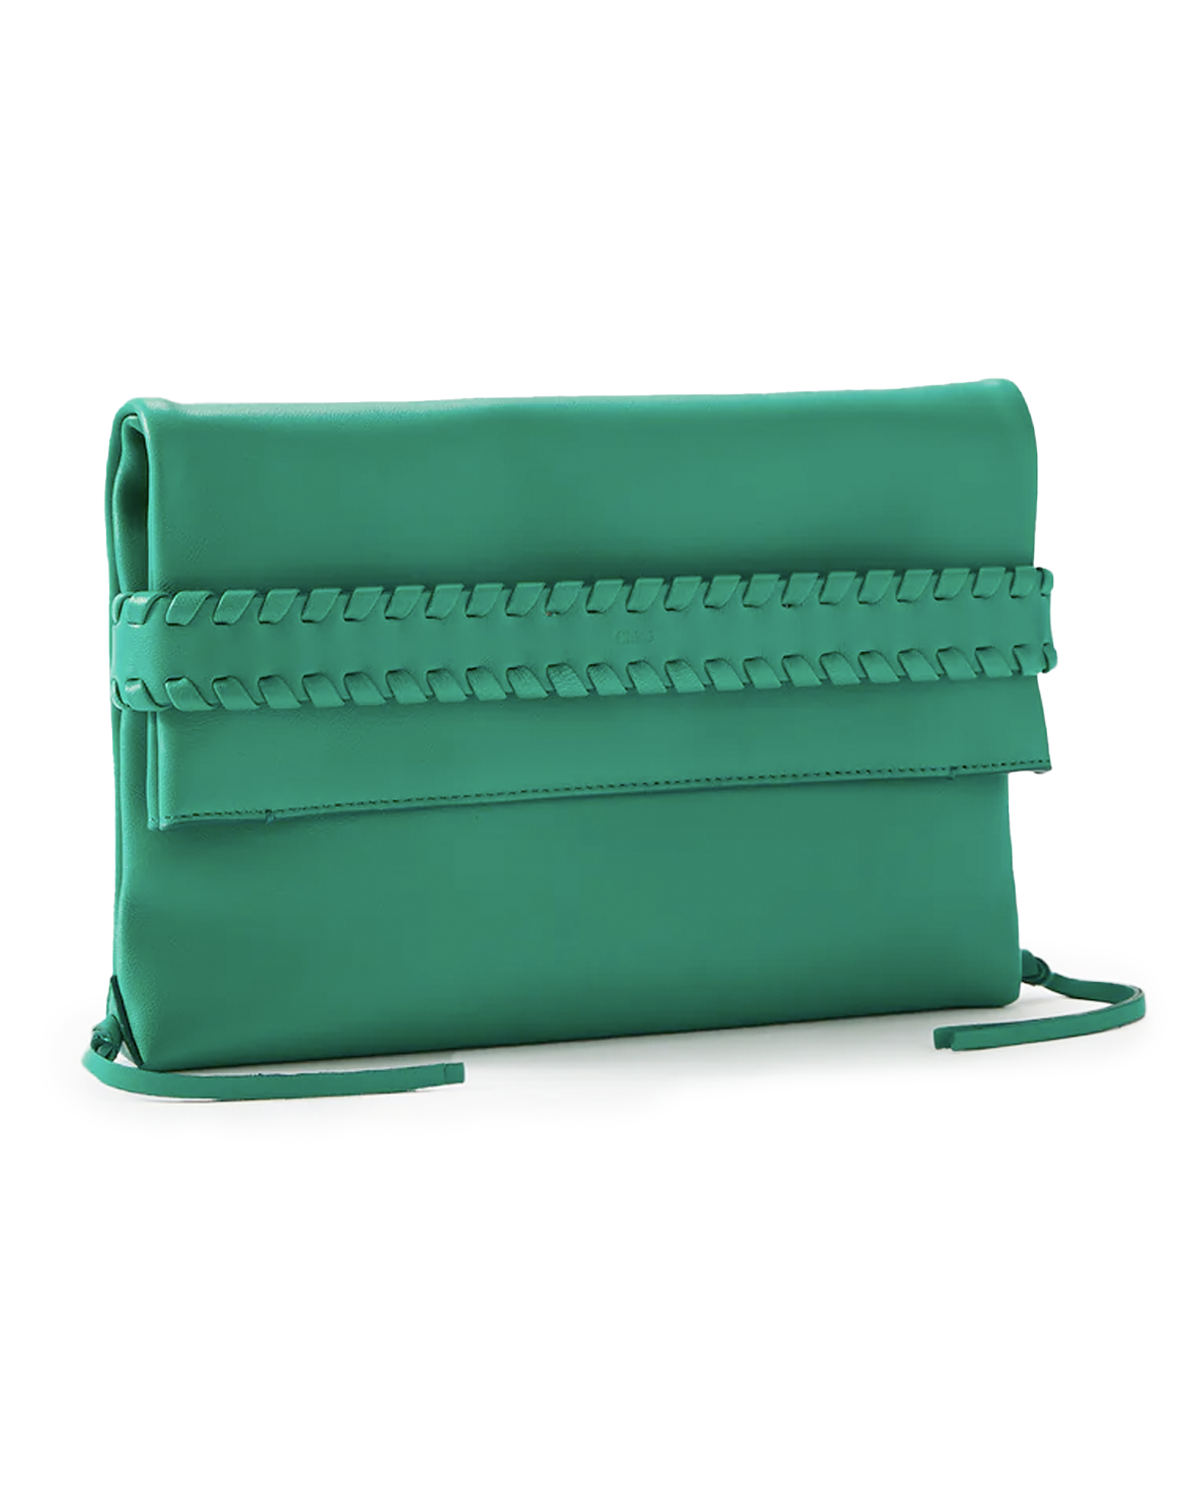 Mony Fold Over Clutch in Pop Green